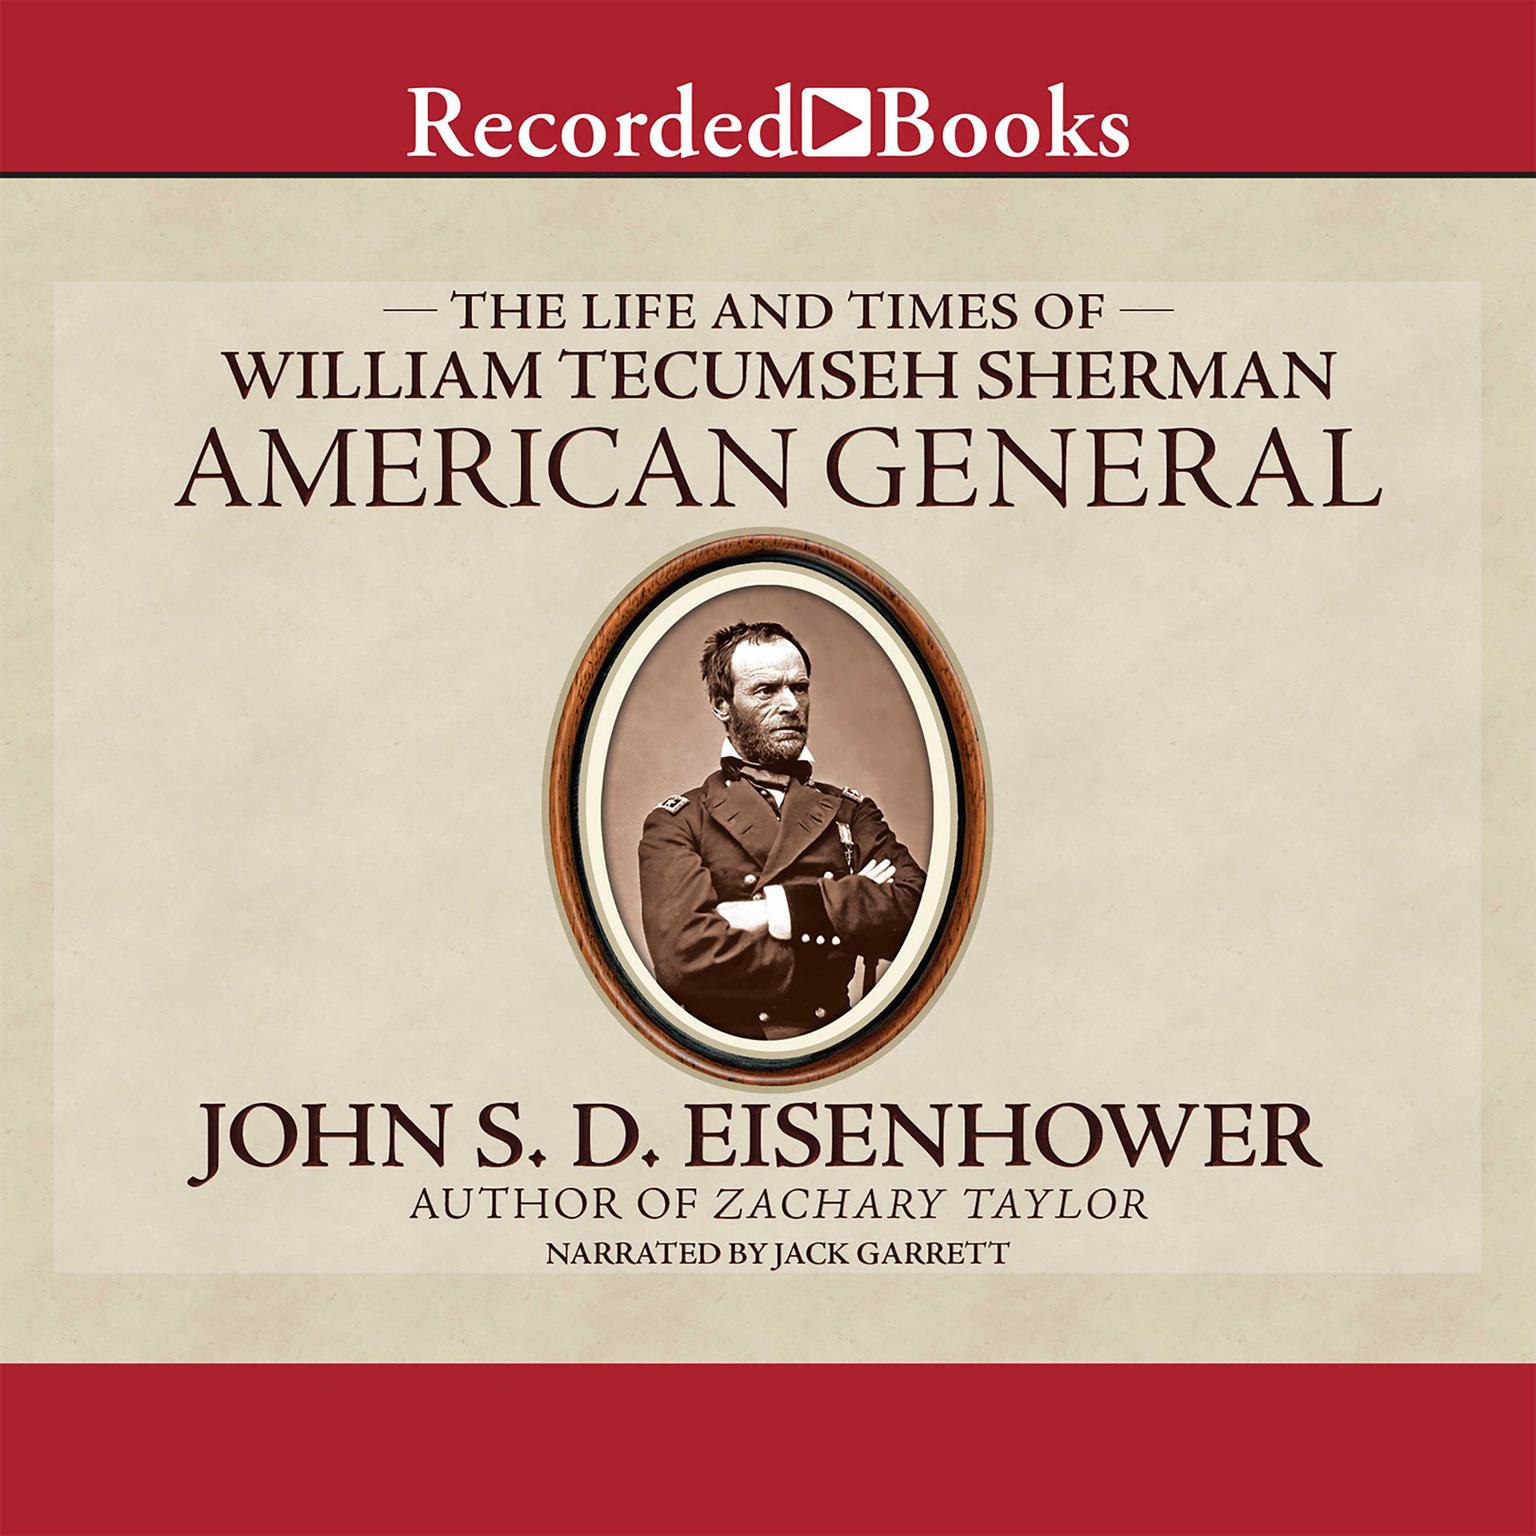 American General: The Life and Times of William Tecumseh Sherman Audiobook, by John S. D. Eisenhower